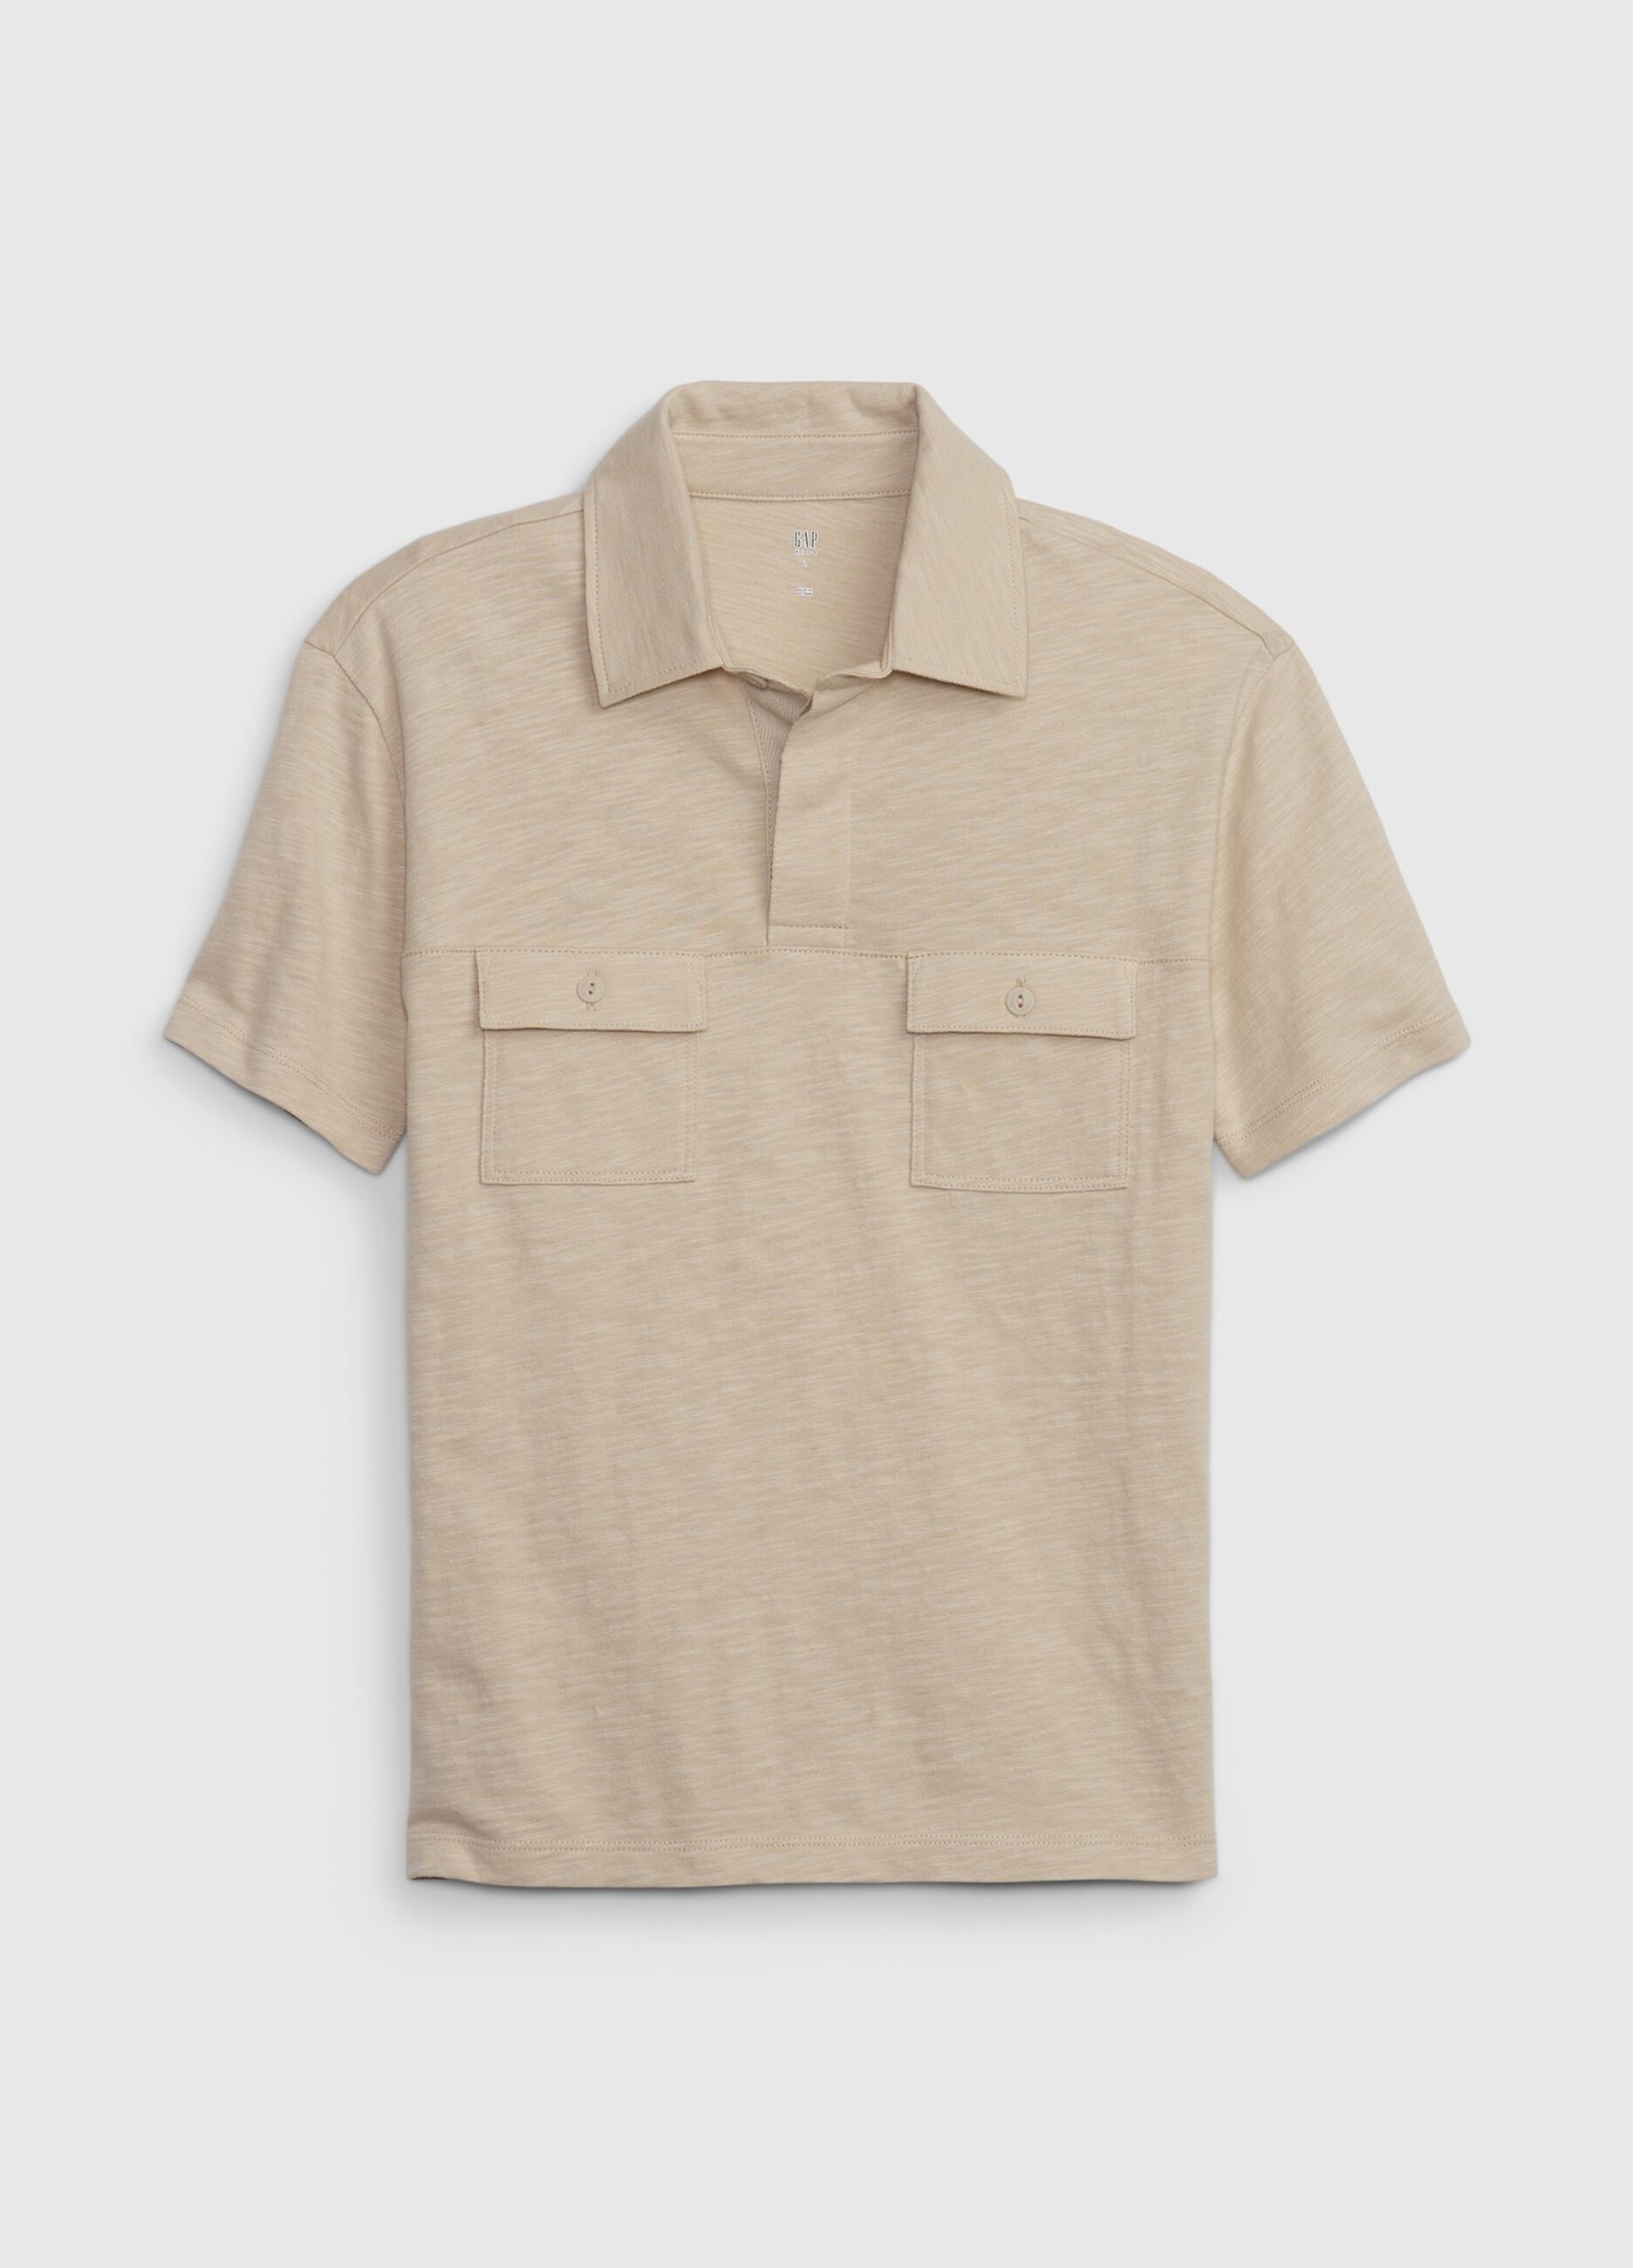 Cotton polo shirt with pockets